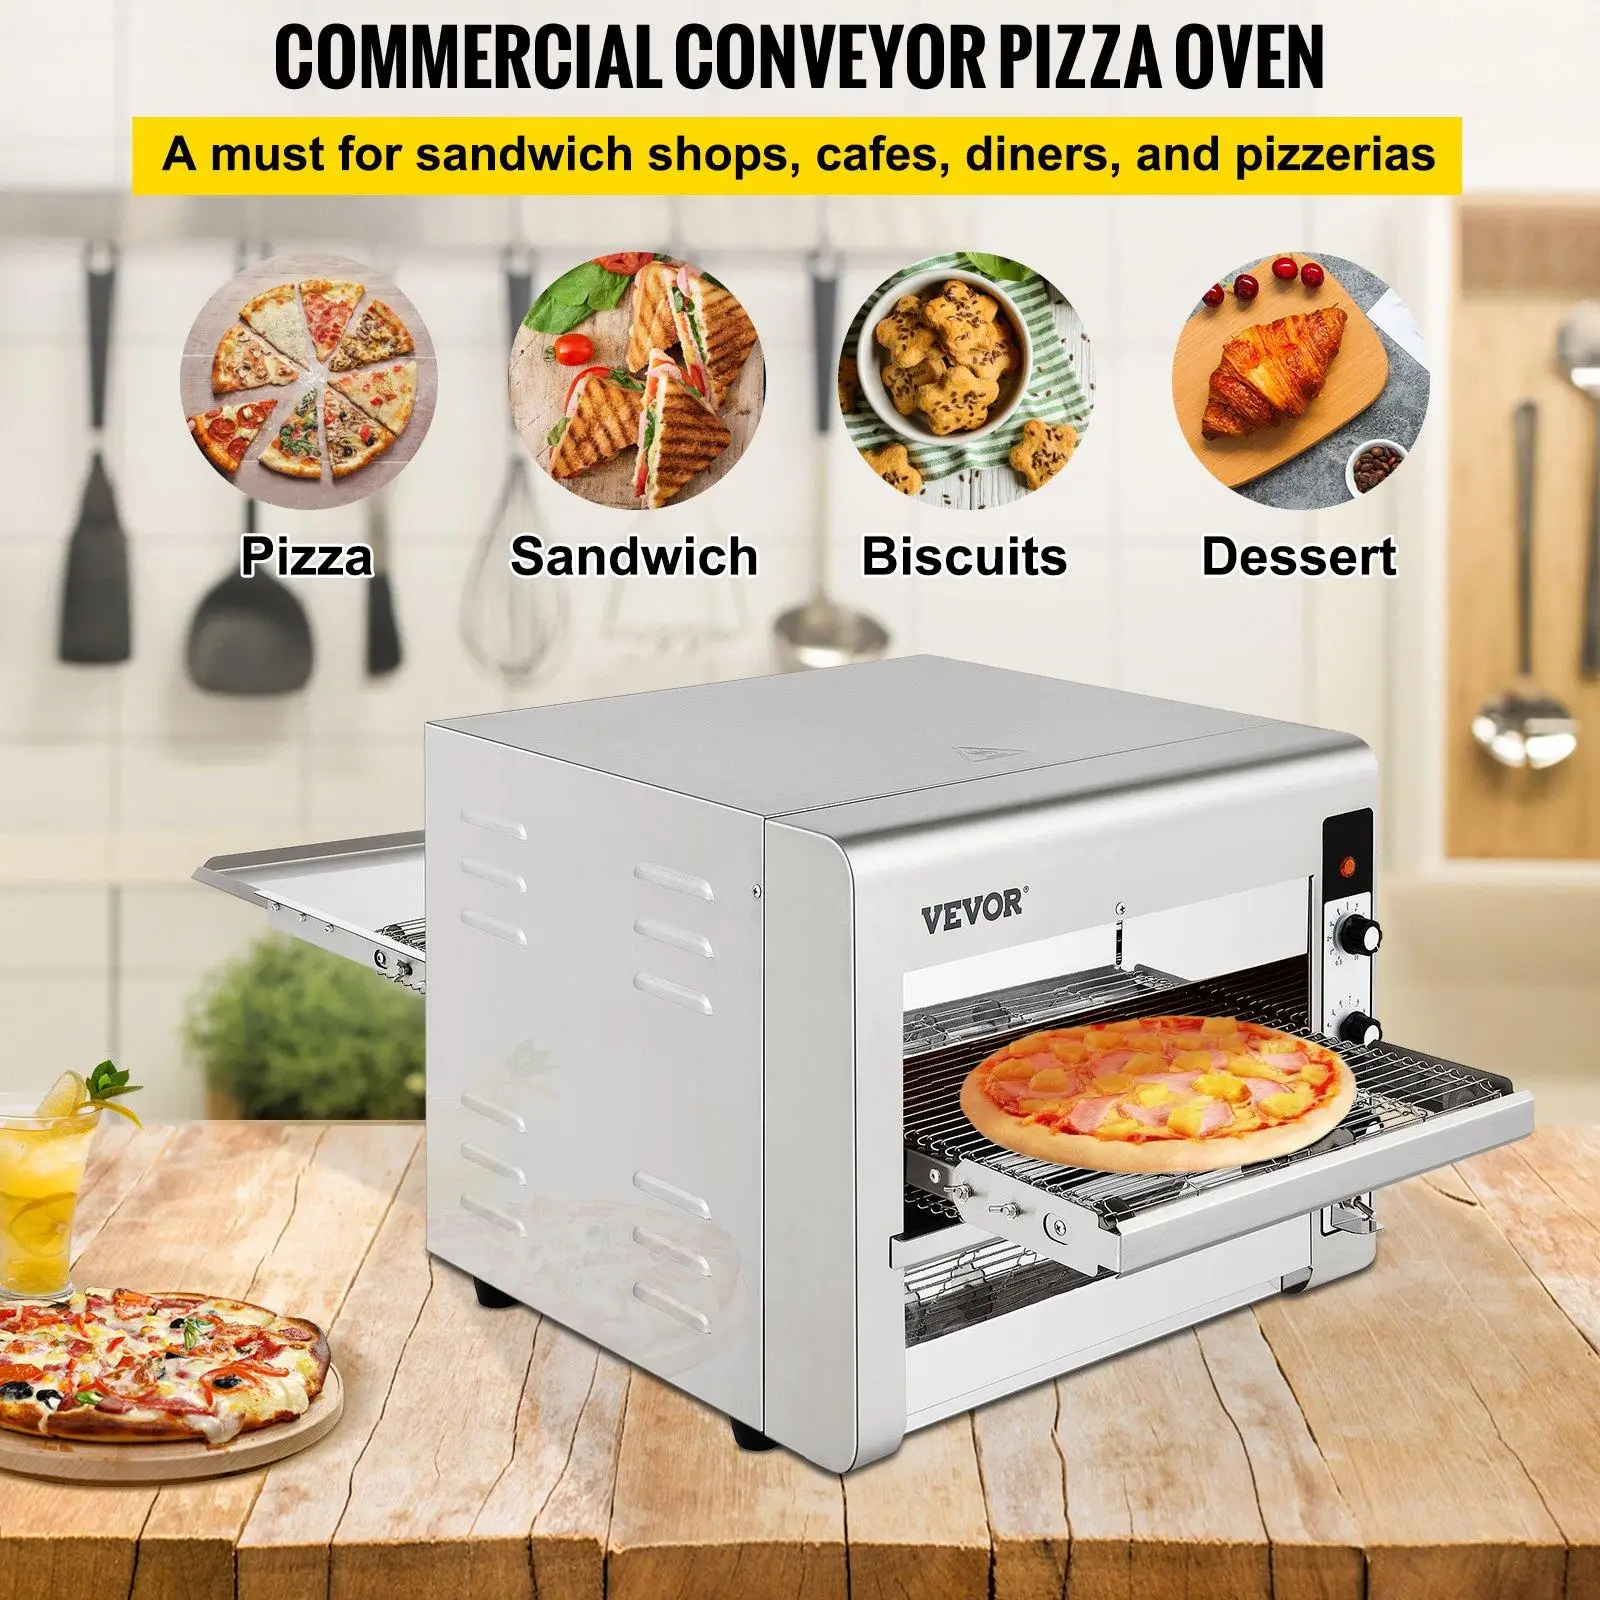 Conveyor commercial pizza oven